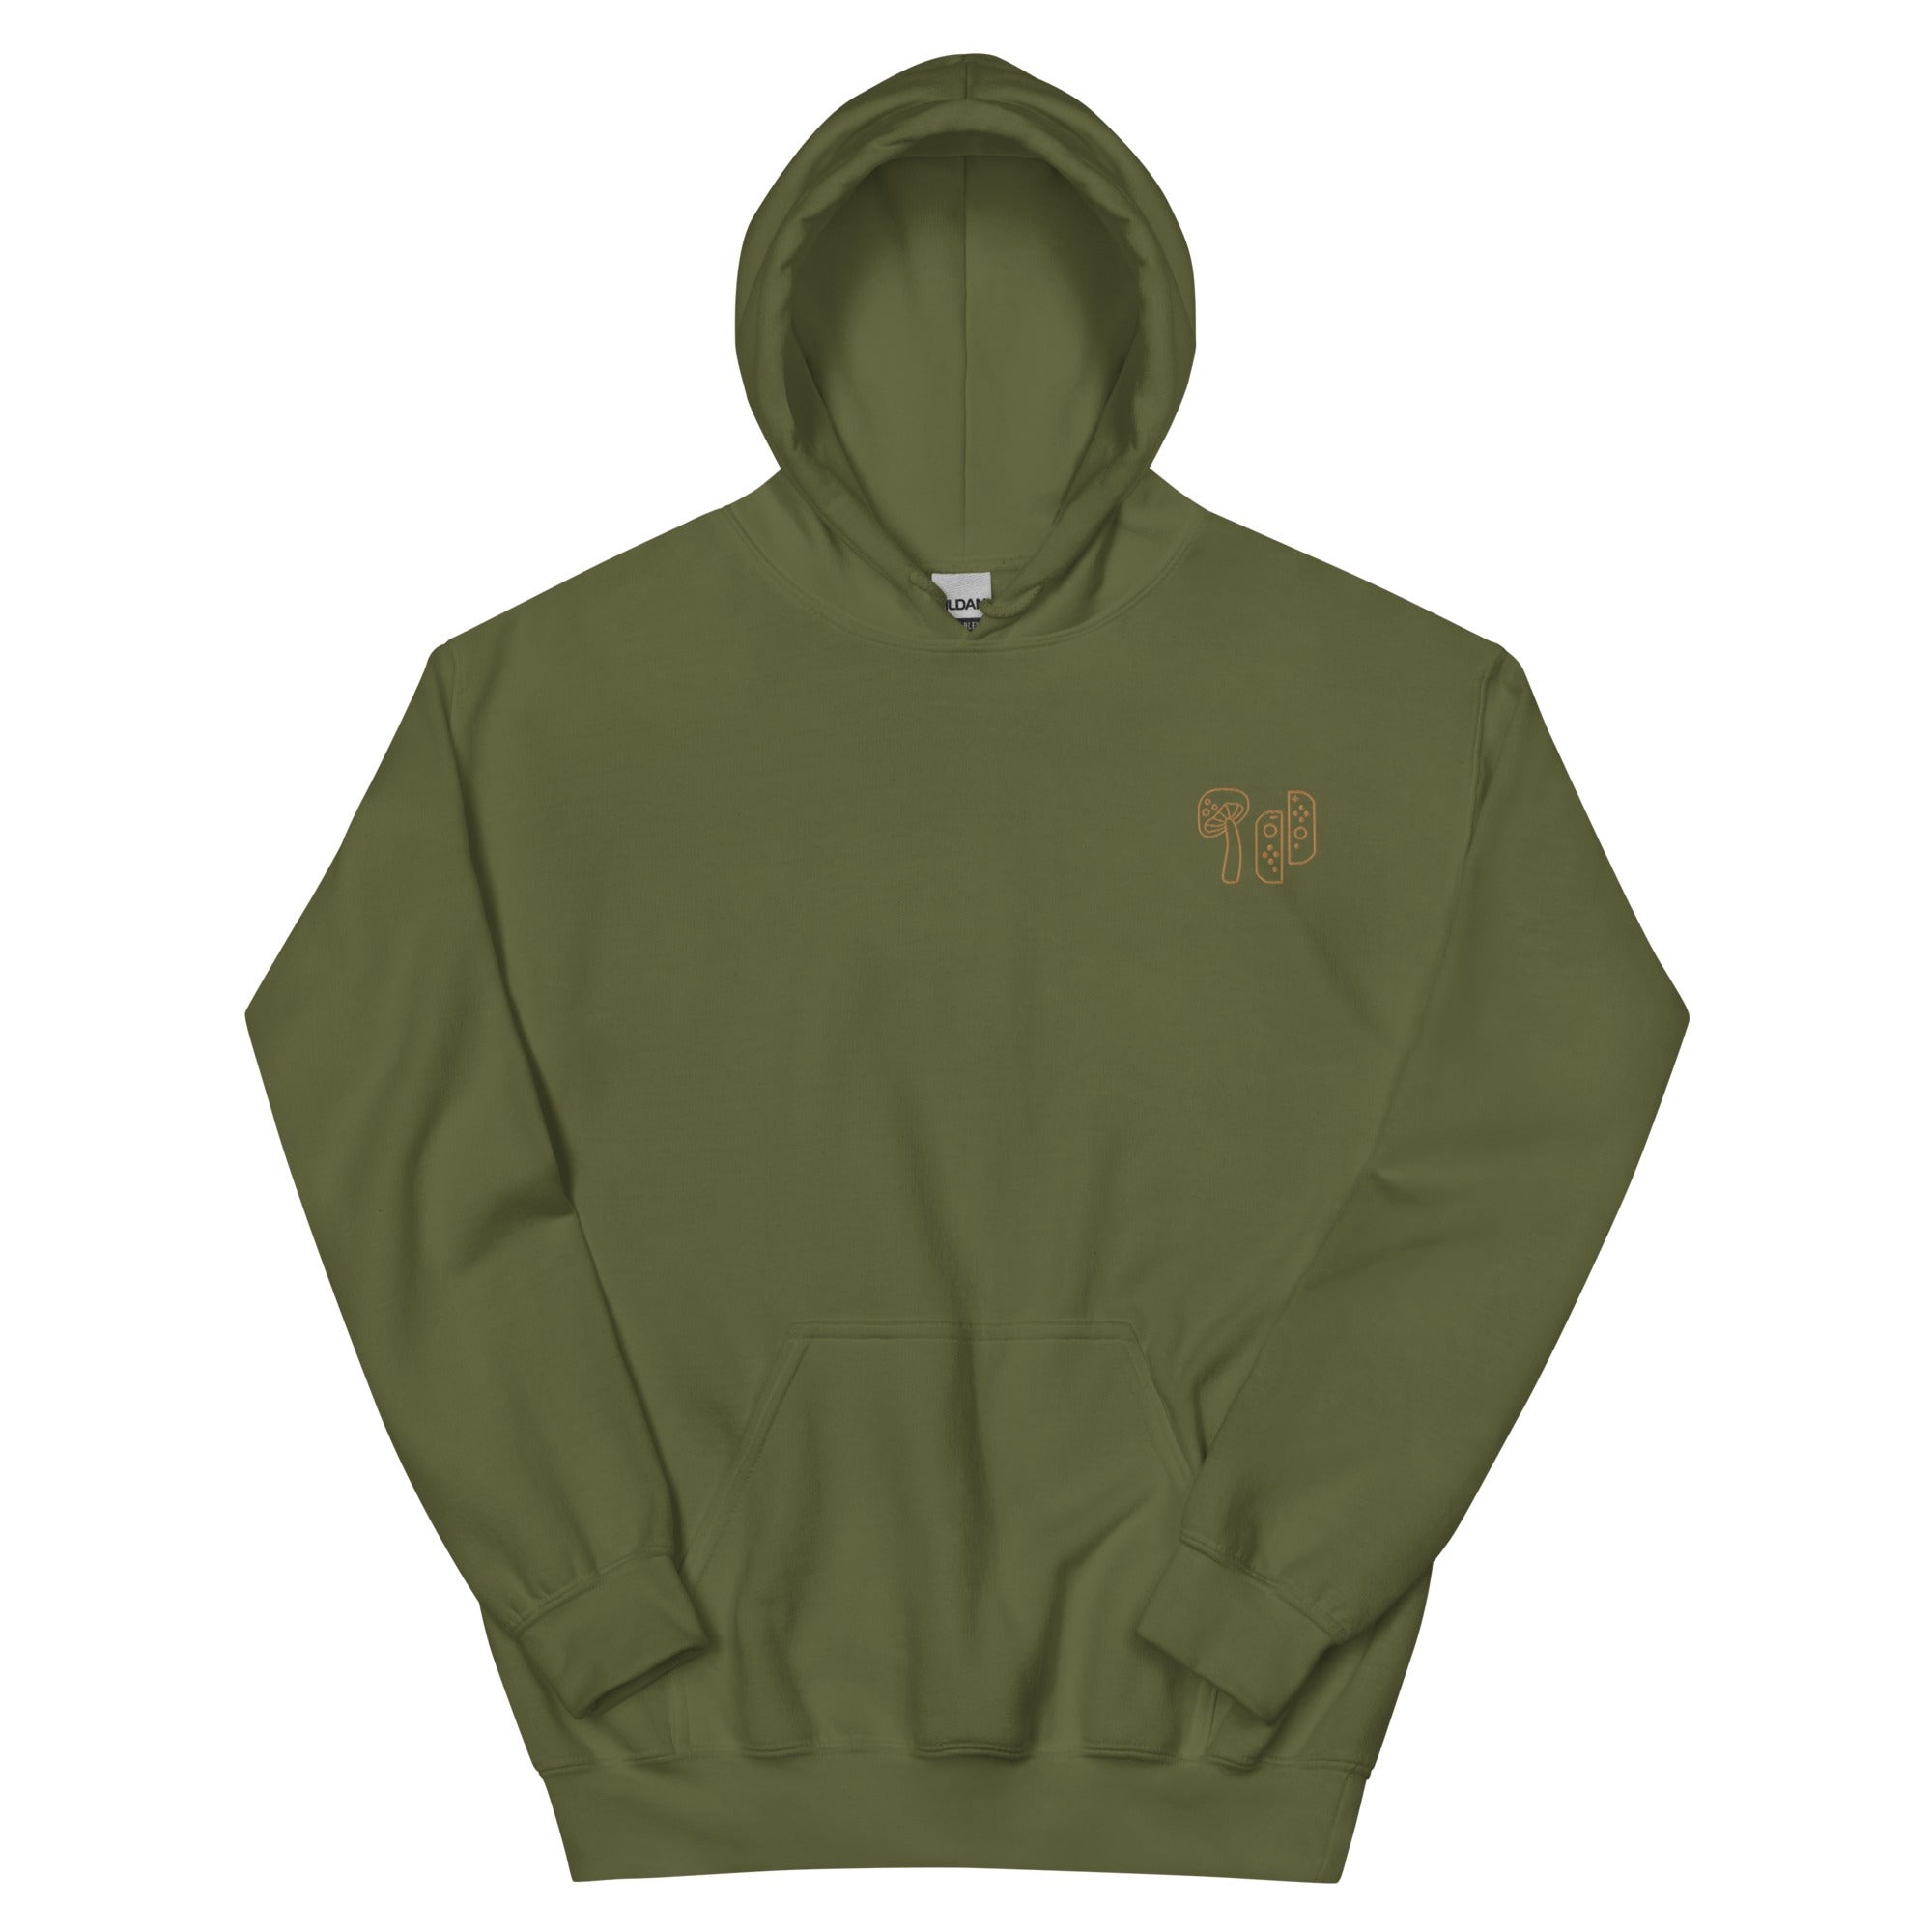 Mushroom & Switch | Embroidered Unisex Hoodie | Cozy Gamer Threads and Thistles Inventory Military Green S 